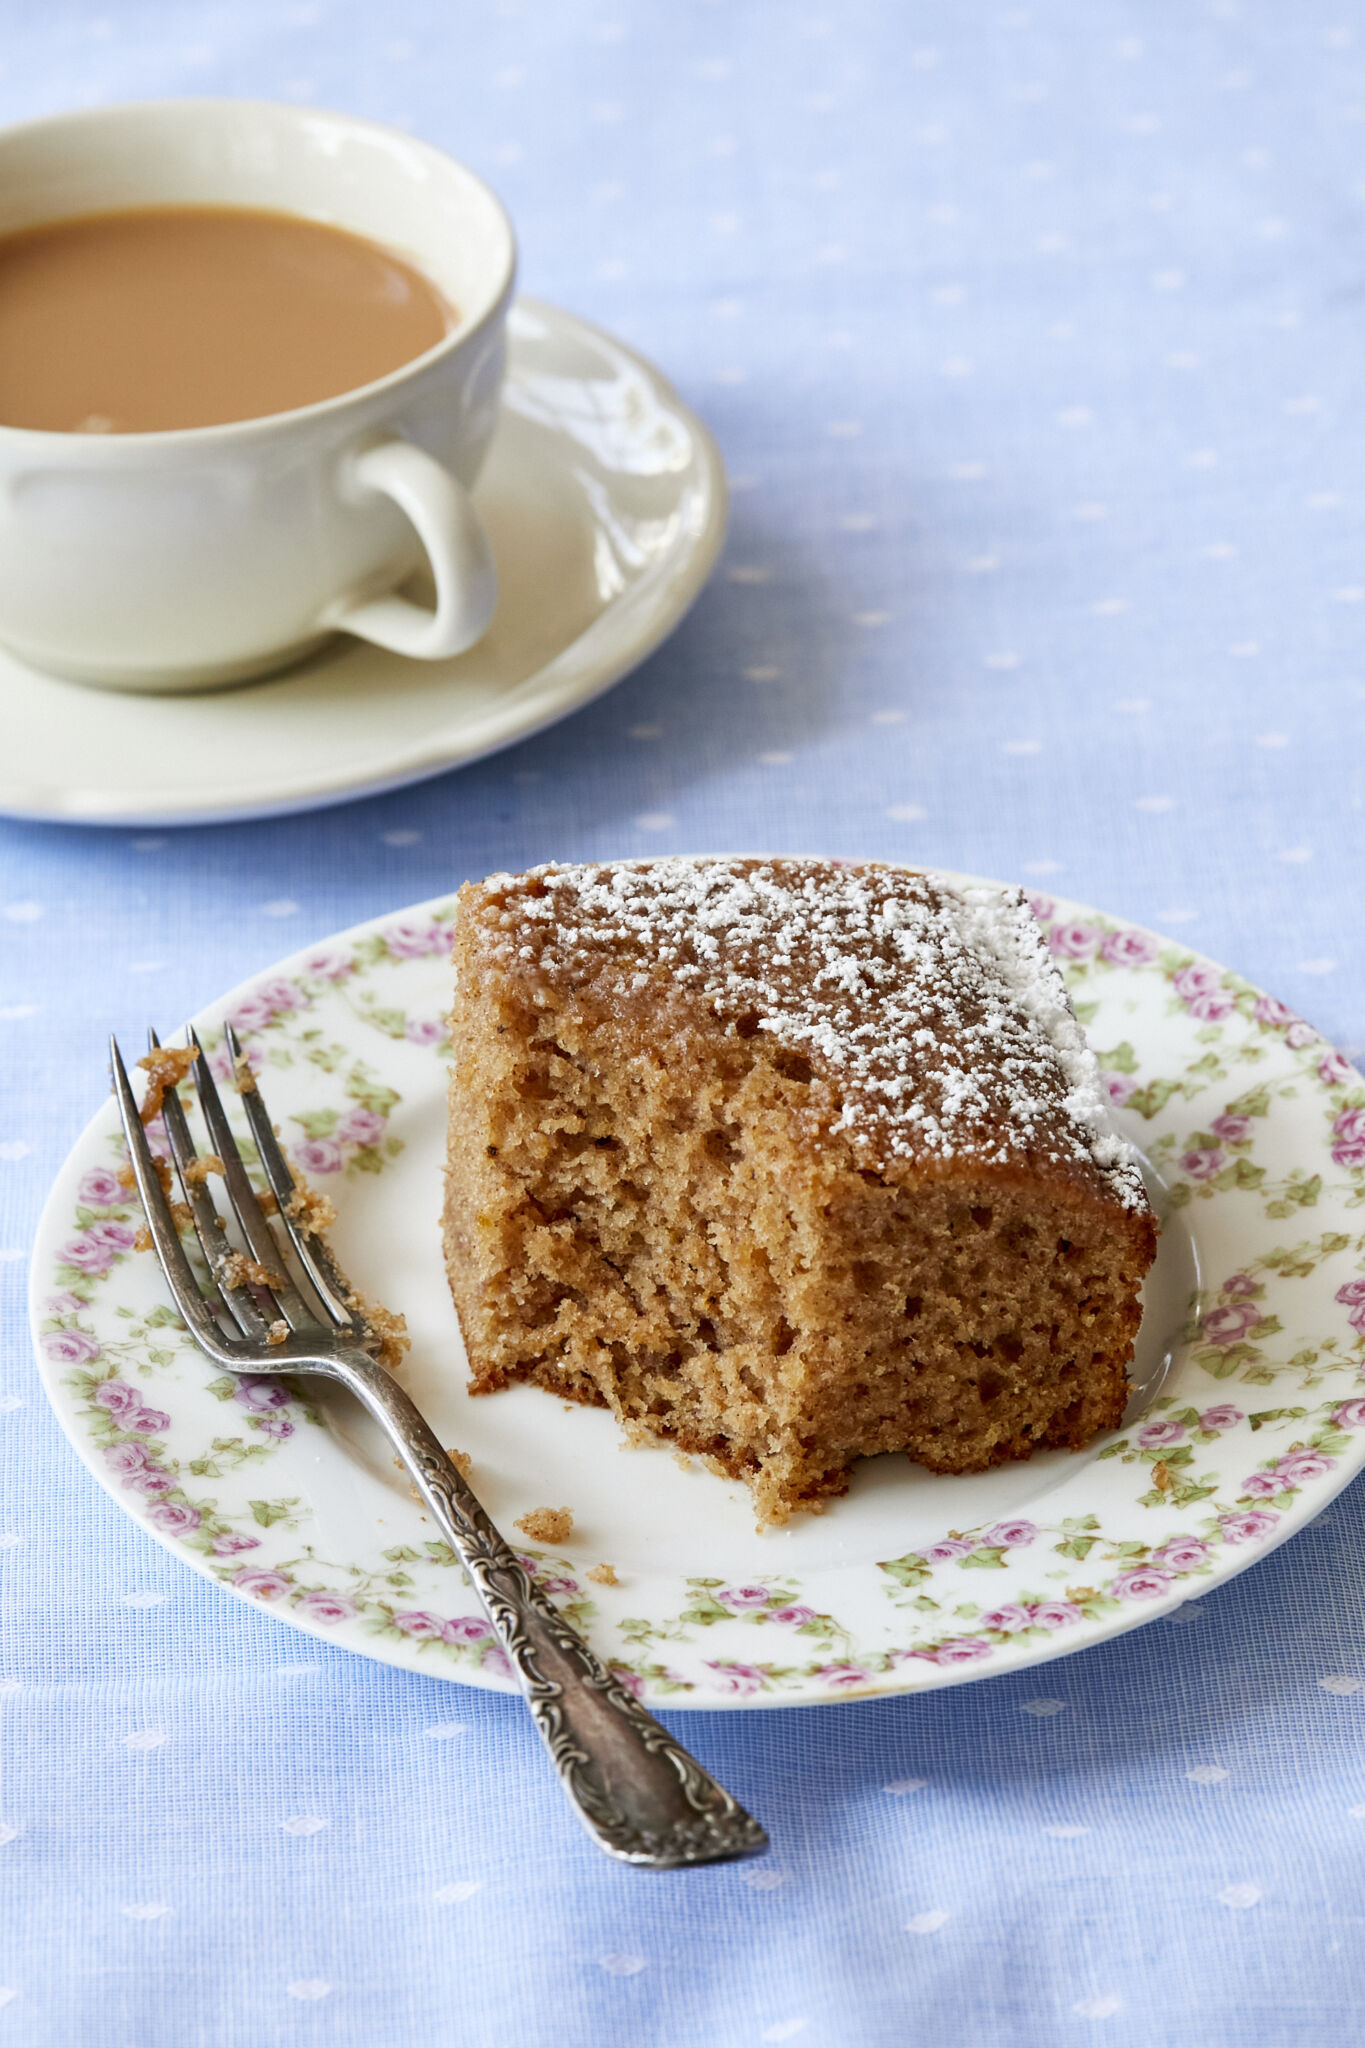 A generous square of Traditional Irish Spice Cake dusted with powdered sugar is served on a floral dessert plate. One bite has been taken and it clearly shows the delectably moist, fine crumb. The cake is paired with a cup of tea. 